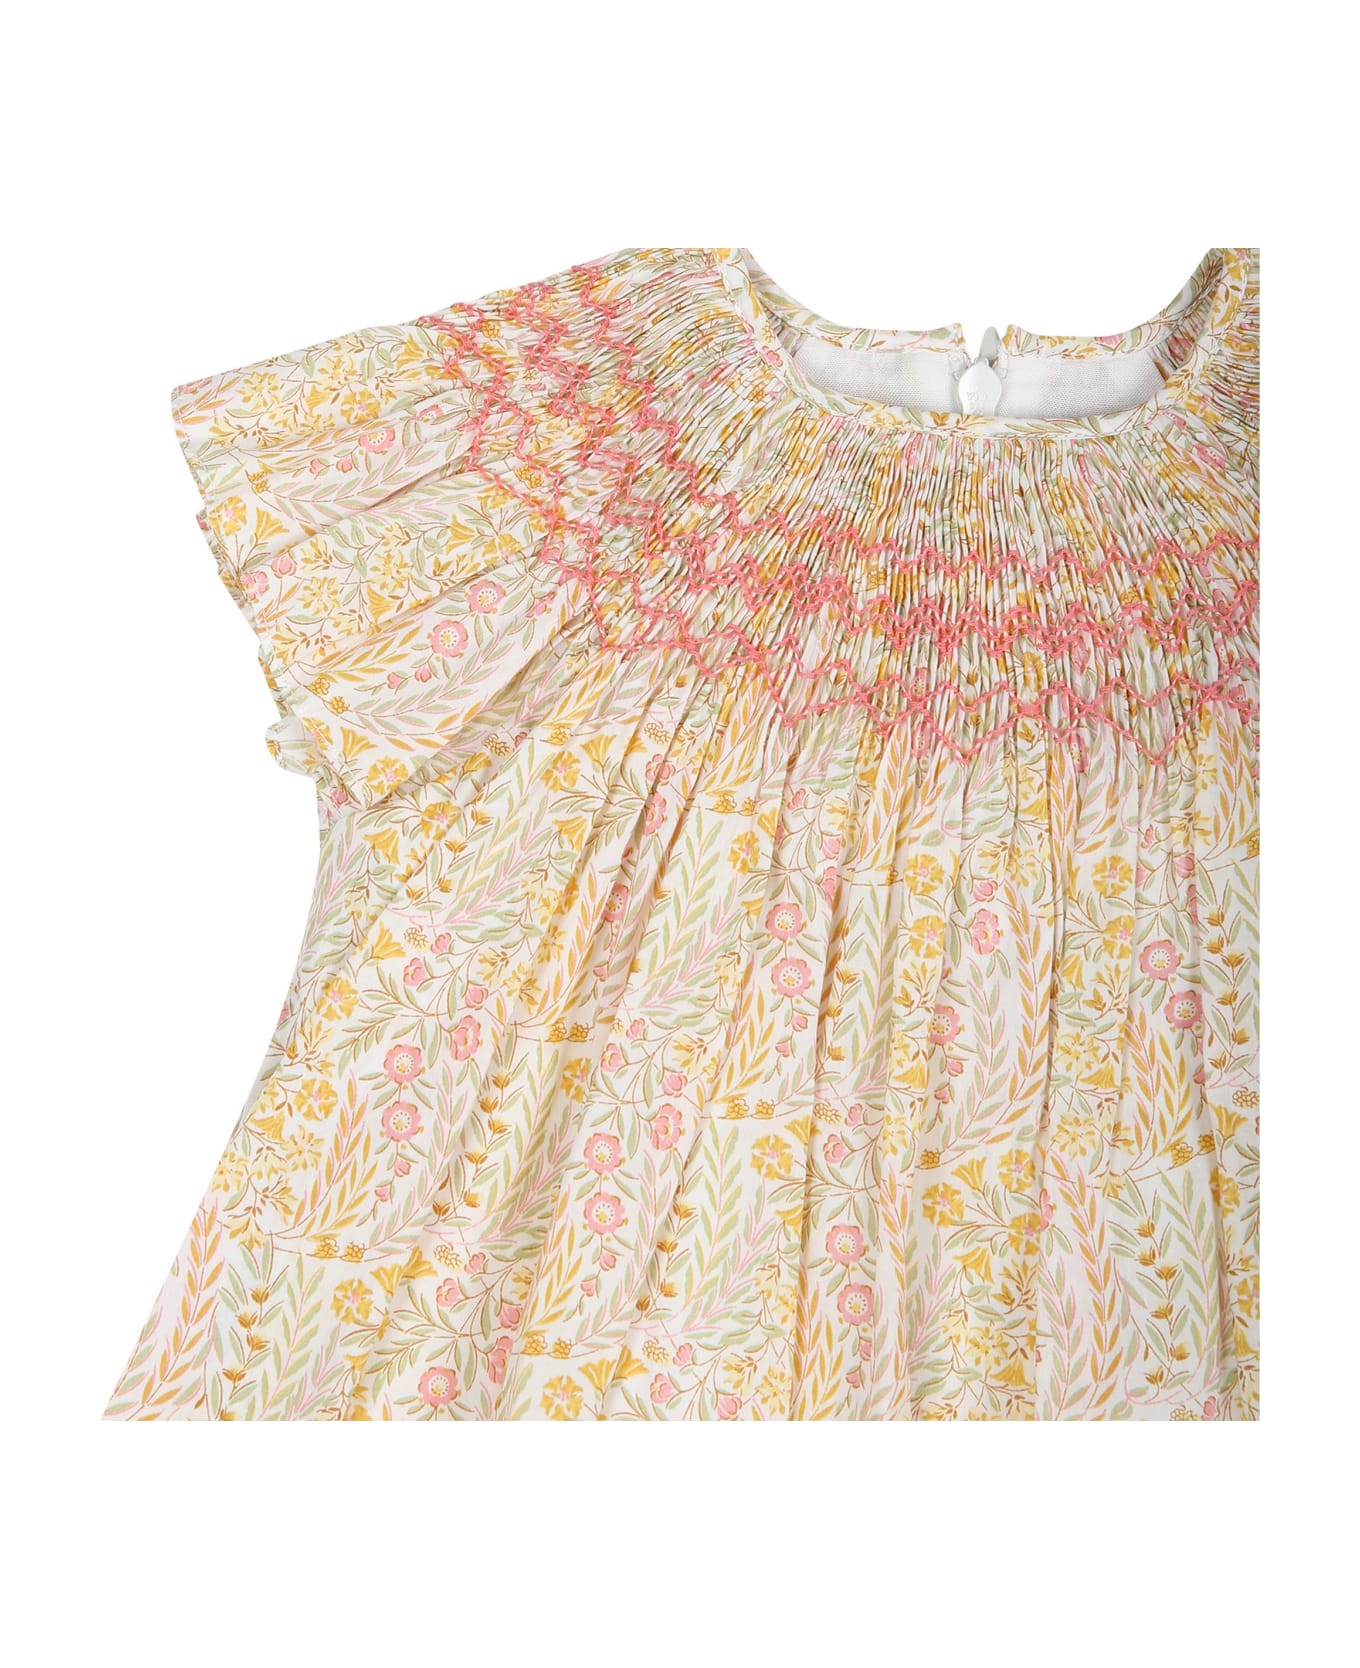 Tartine et Chocolat Ivory Casual Dress For Baby Girl With Liberty Fabric - Ivory